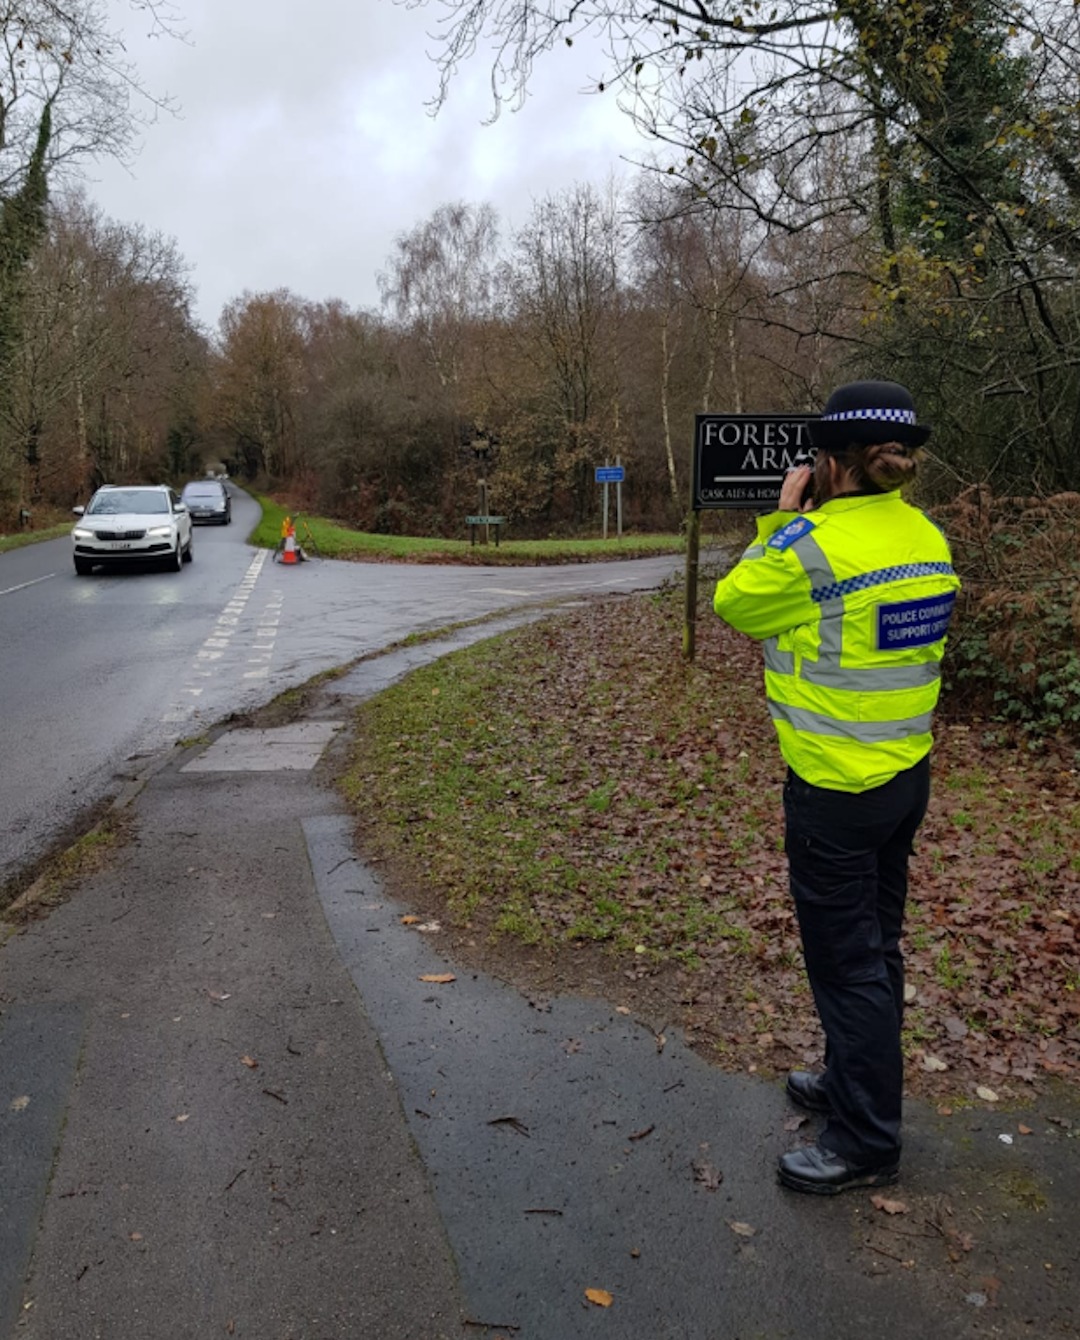 Police teams in Wealden cracked down on speeding and anti-social driving